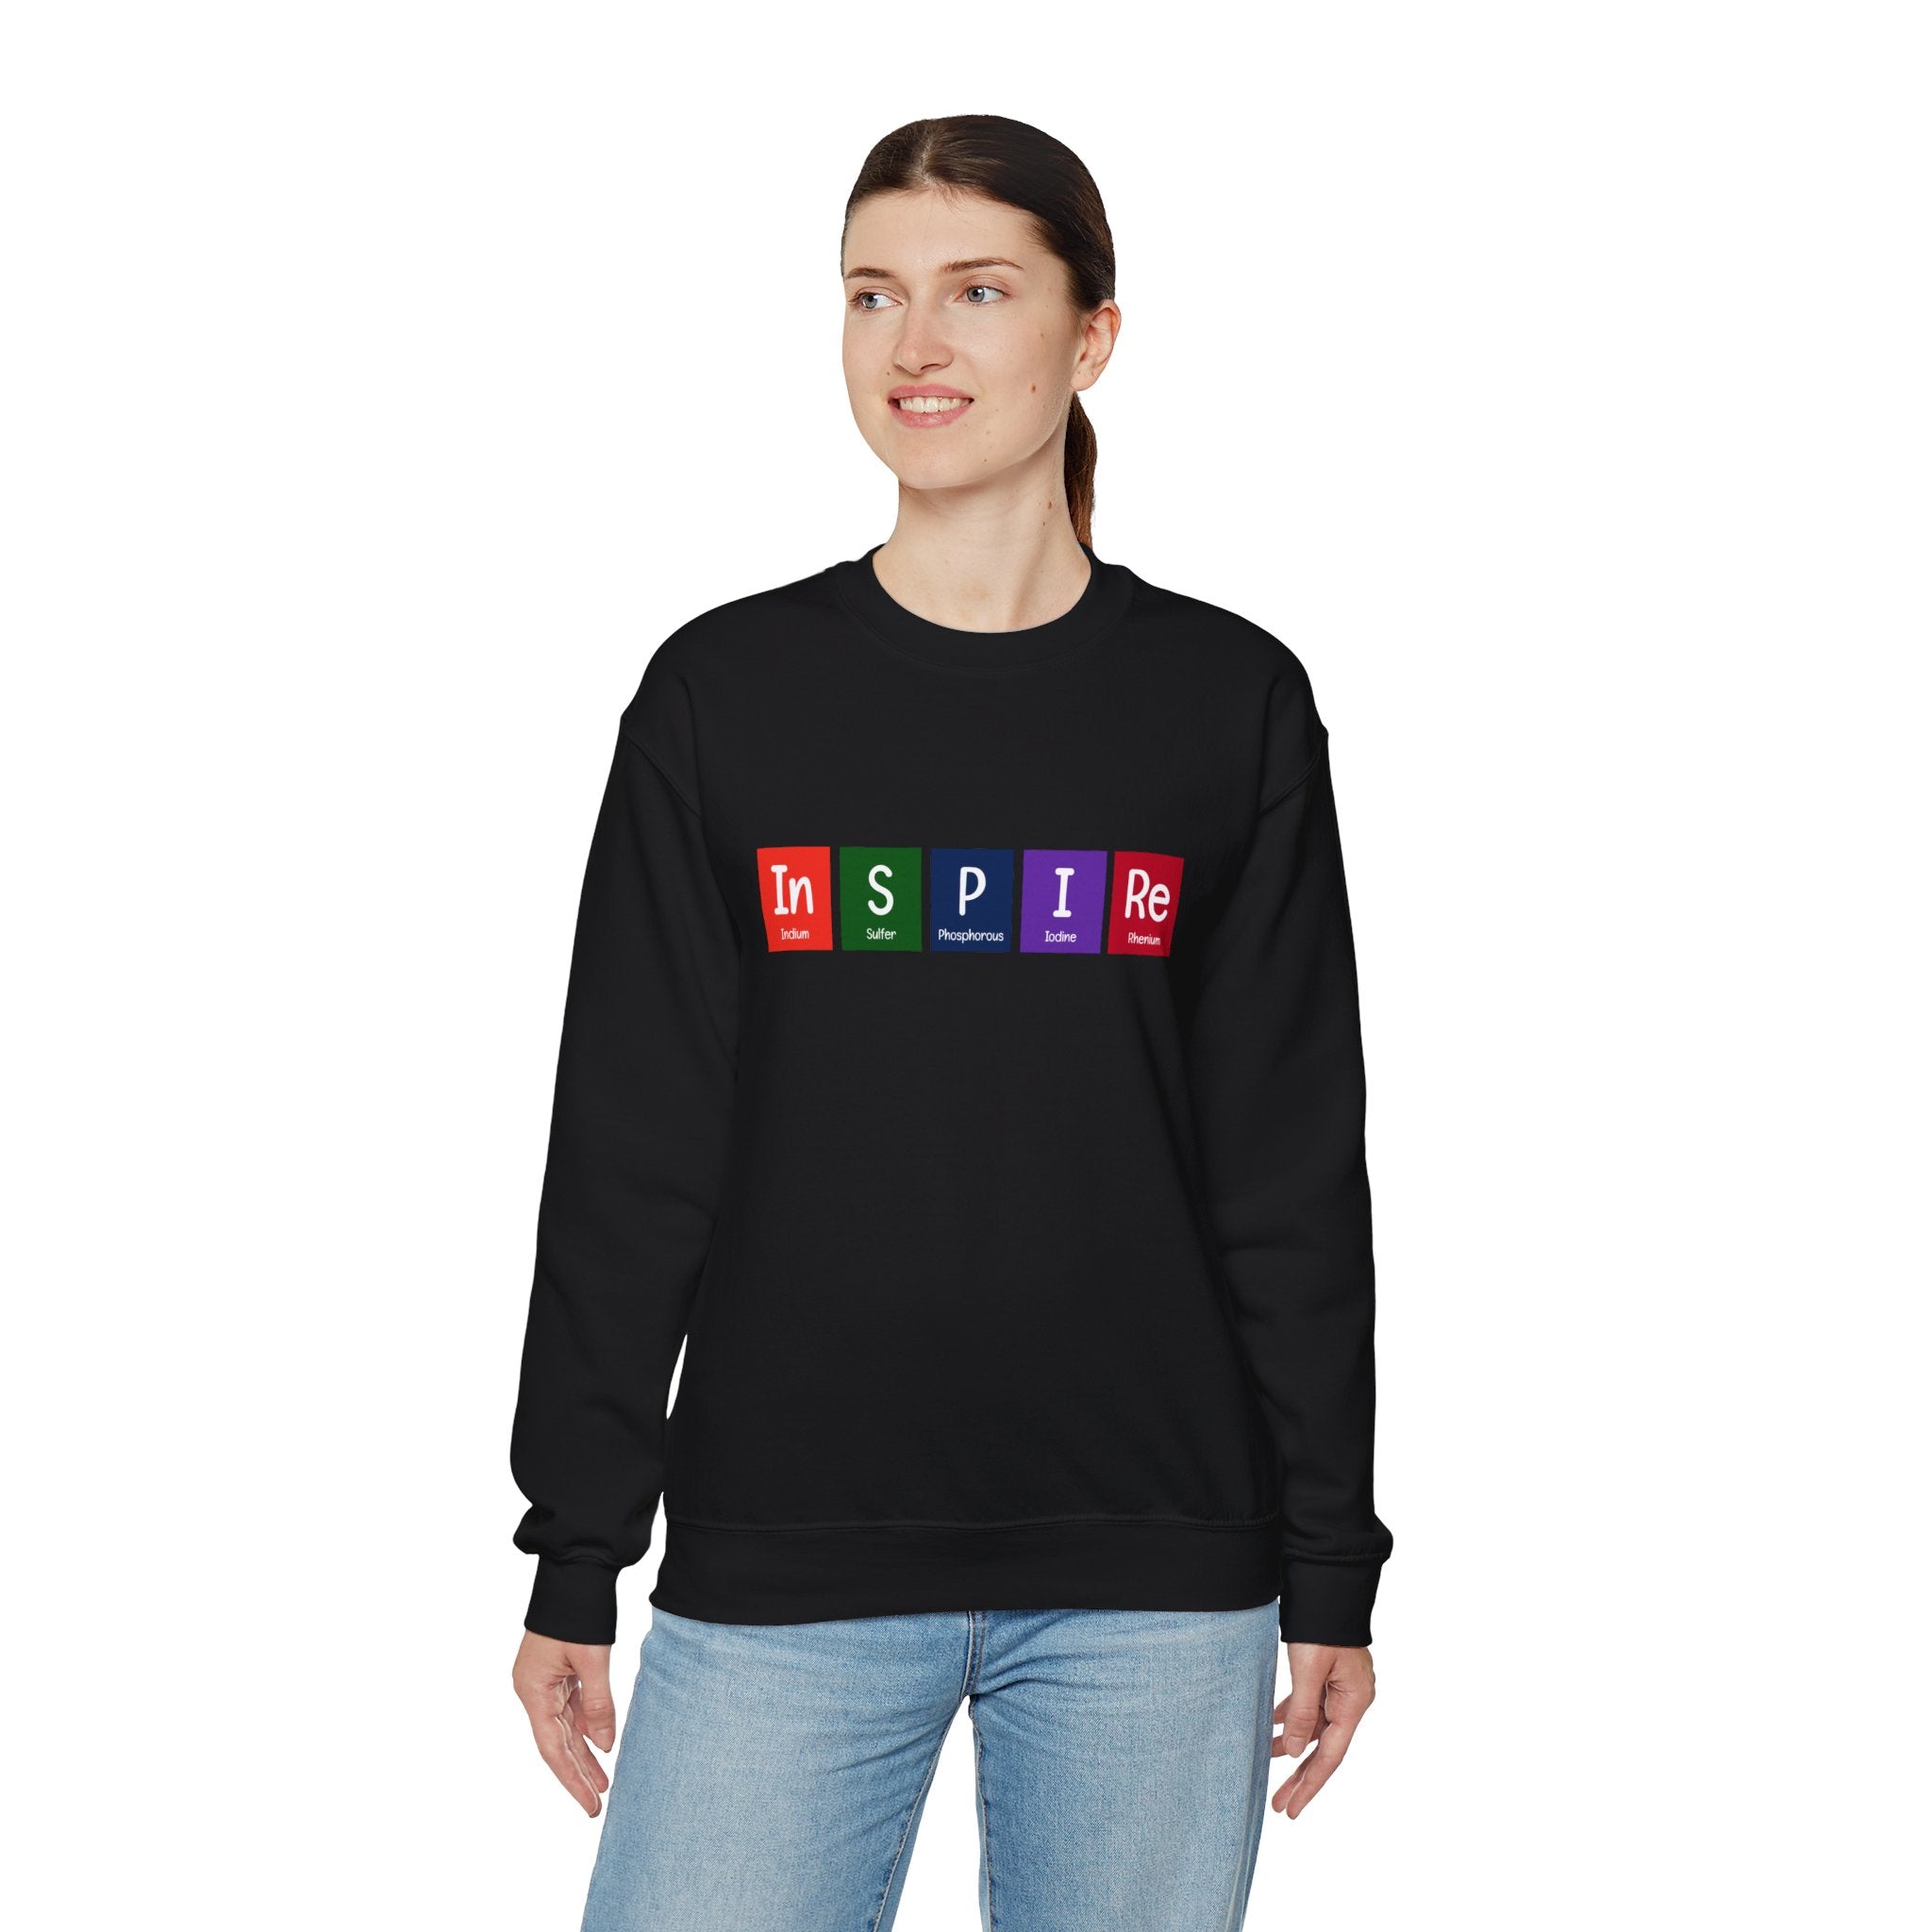 A person wearing a cozy black In-S-P-I-Re - Sweatshirt that has the word "INSPIRE" printed on it, with each letter in a colored box. Perfect for the colder months, they are standing against a white background.